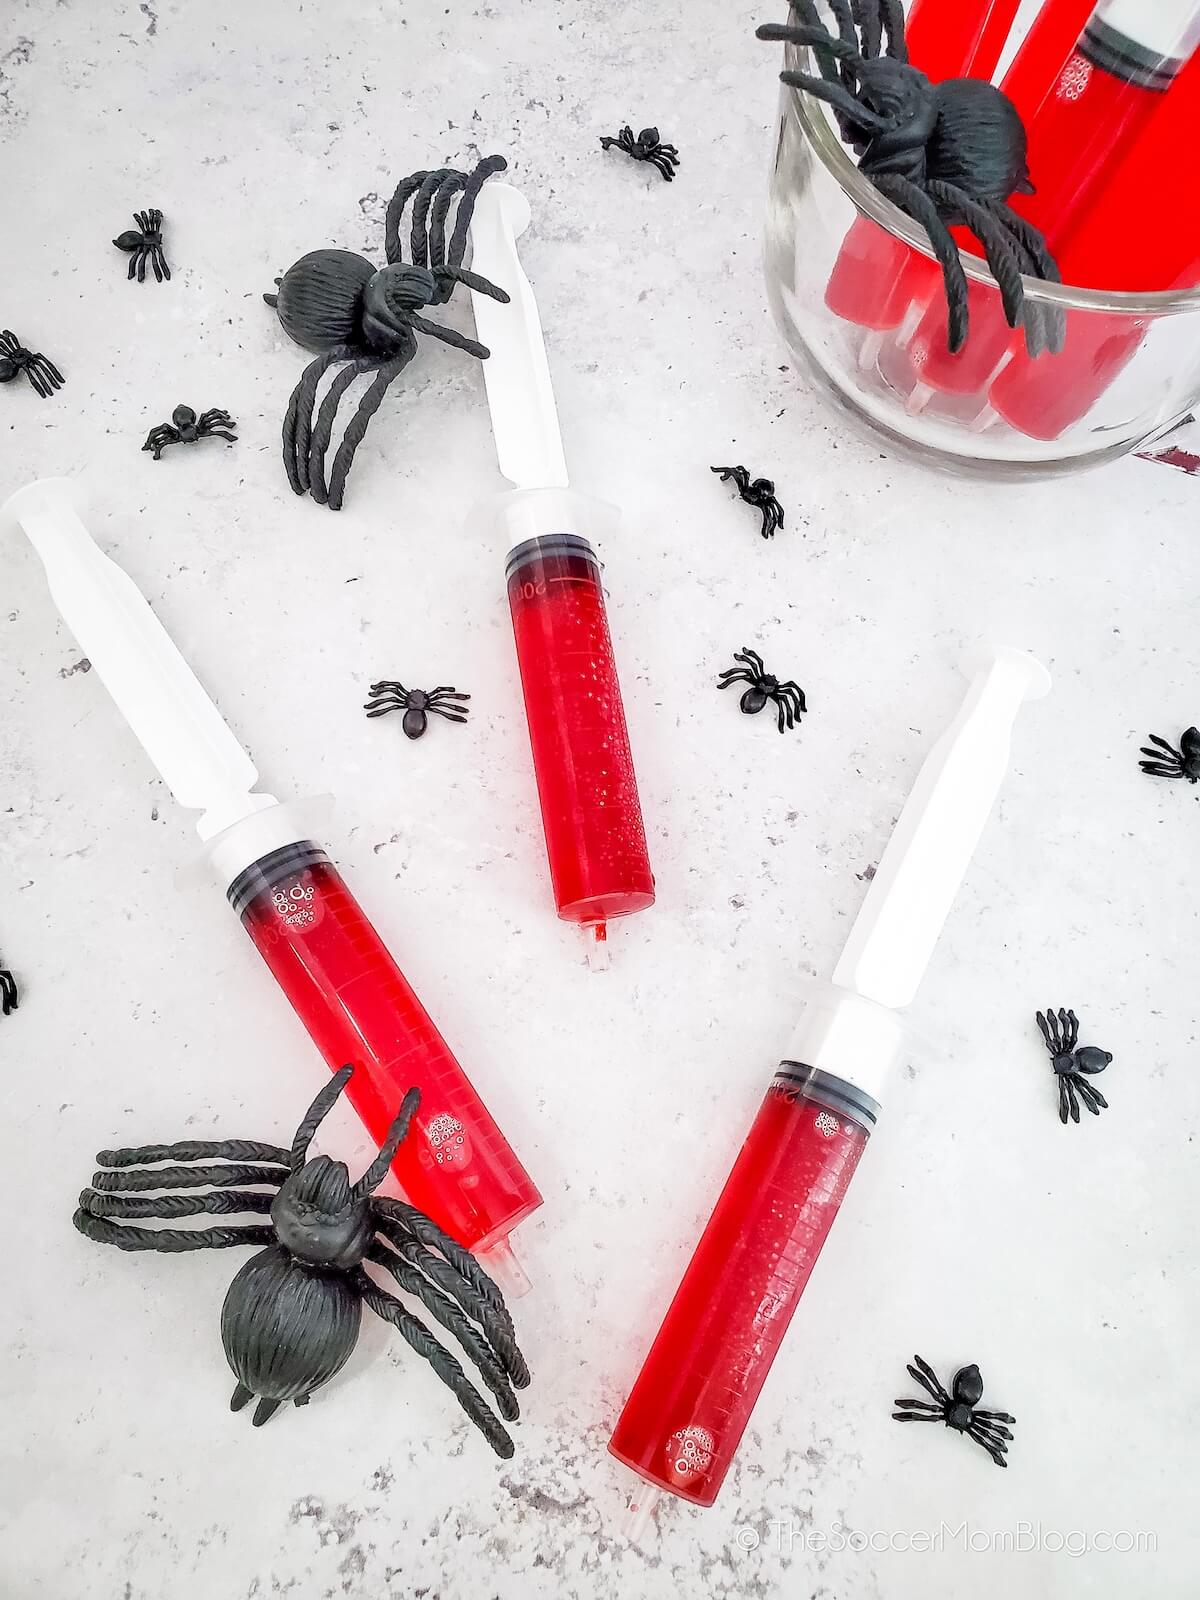 Halloween Jello Shots Syringes filled with red jello